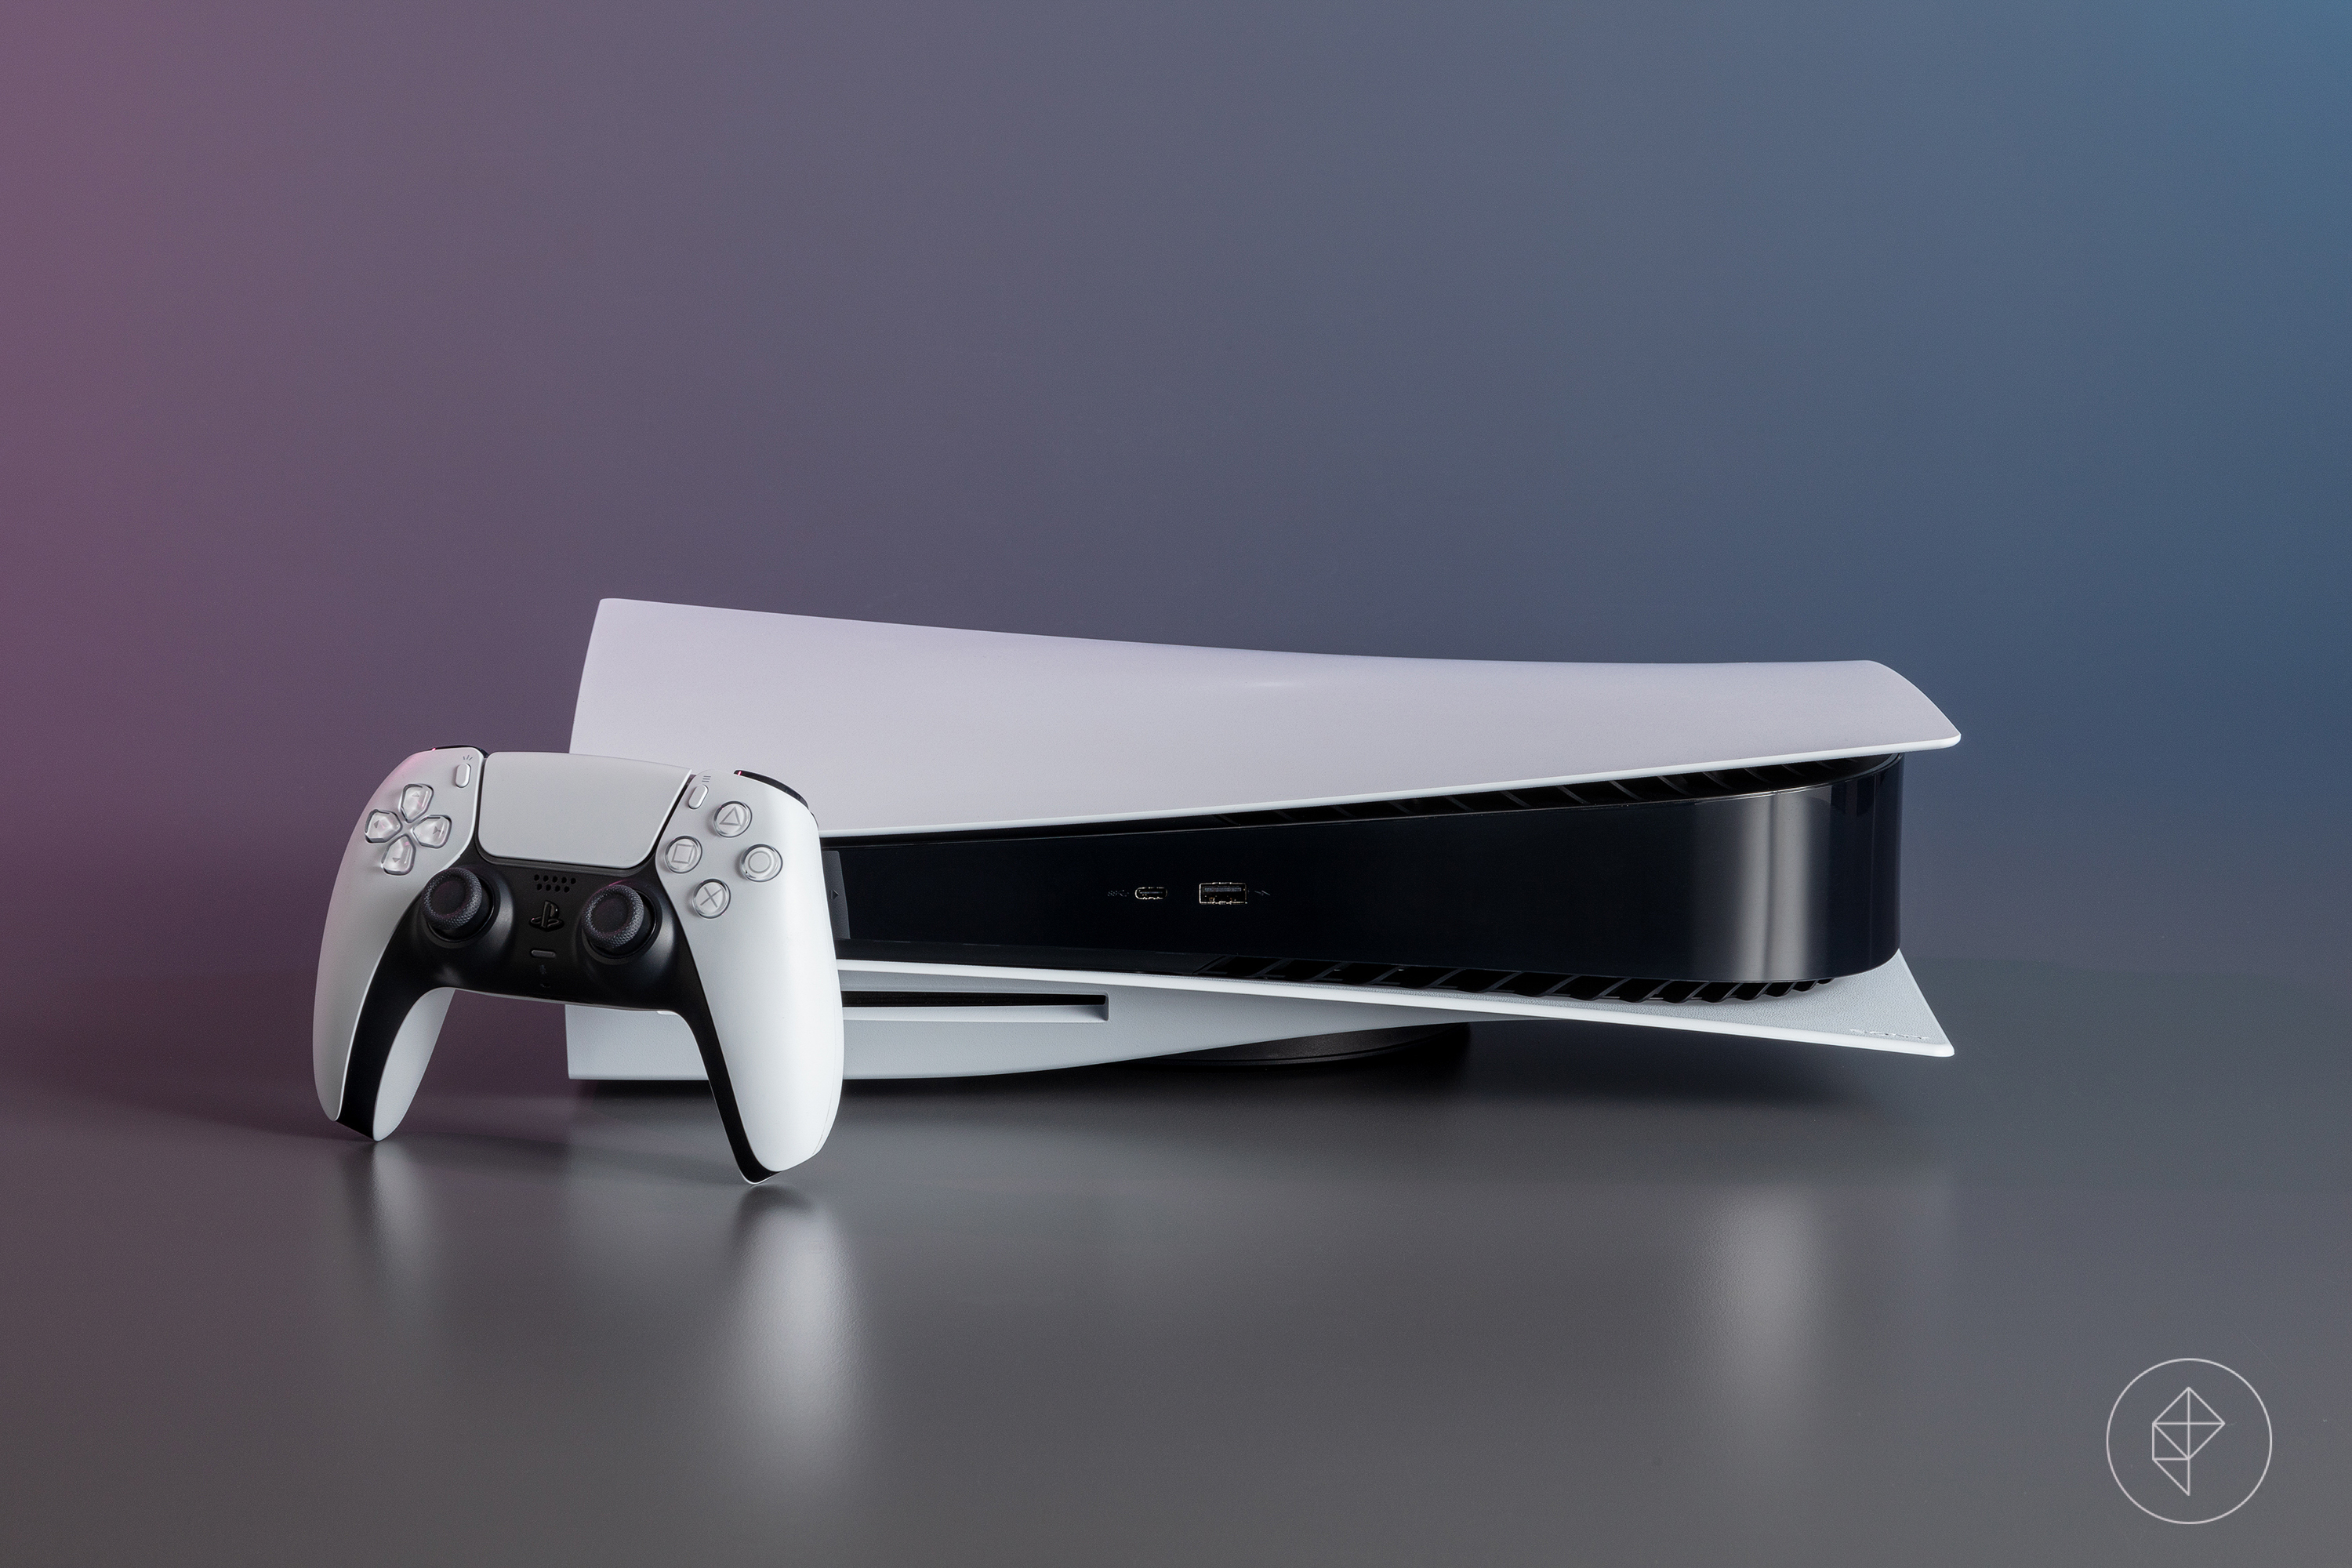 A photo of the standard PlayStation 5 console with a DualSense controller leaning against it